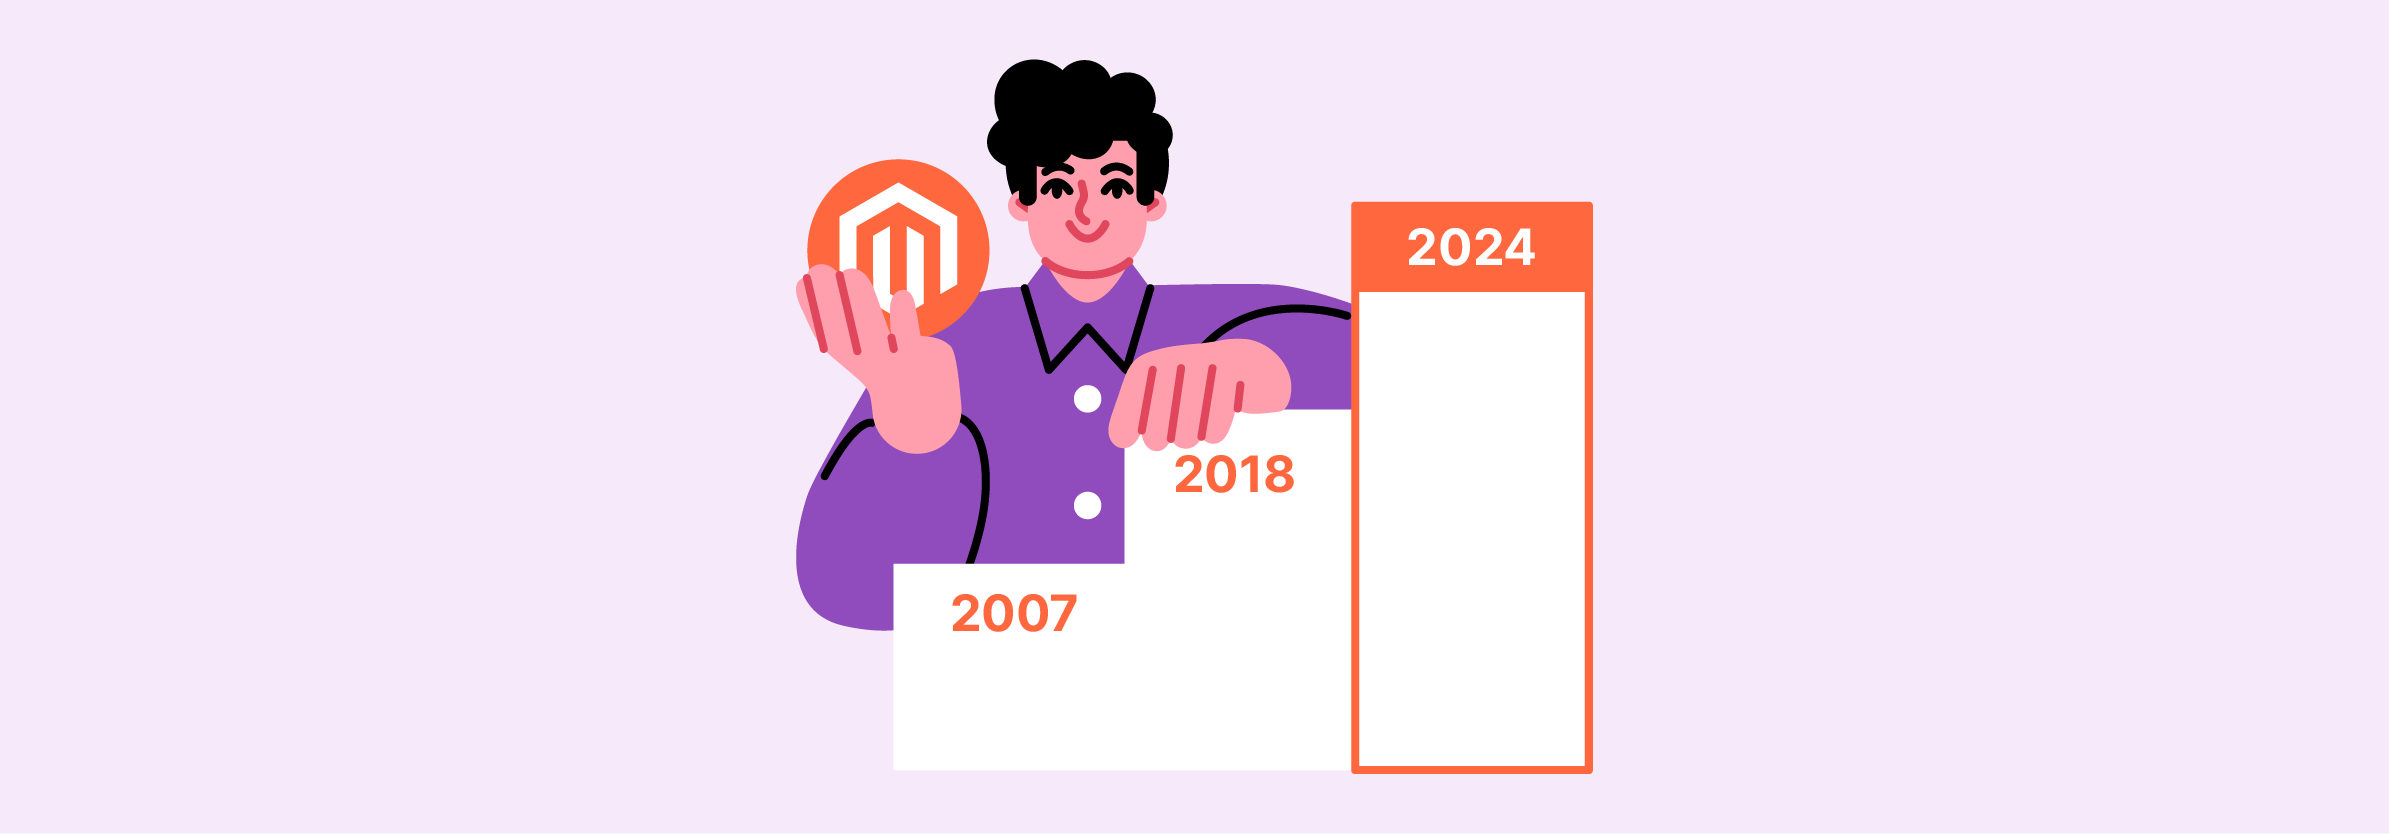 Timeline showcasing Magento version history and its influence on the ecommerce sector